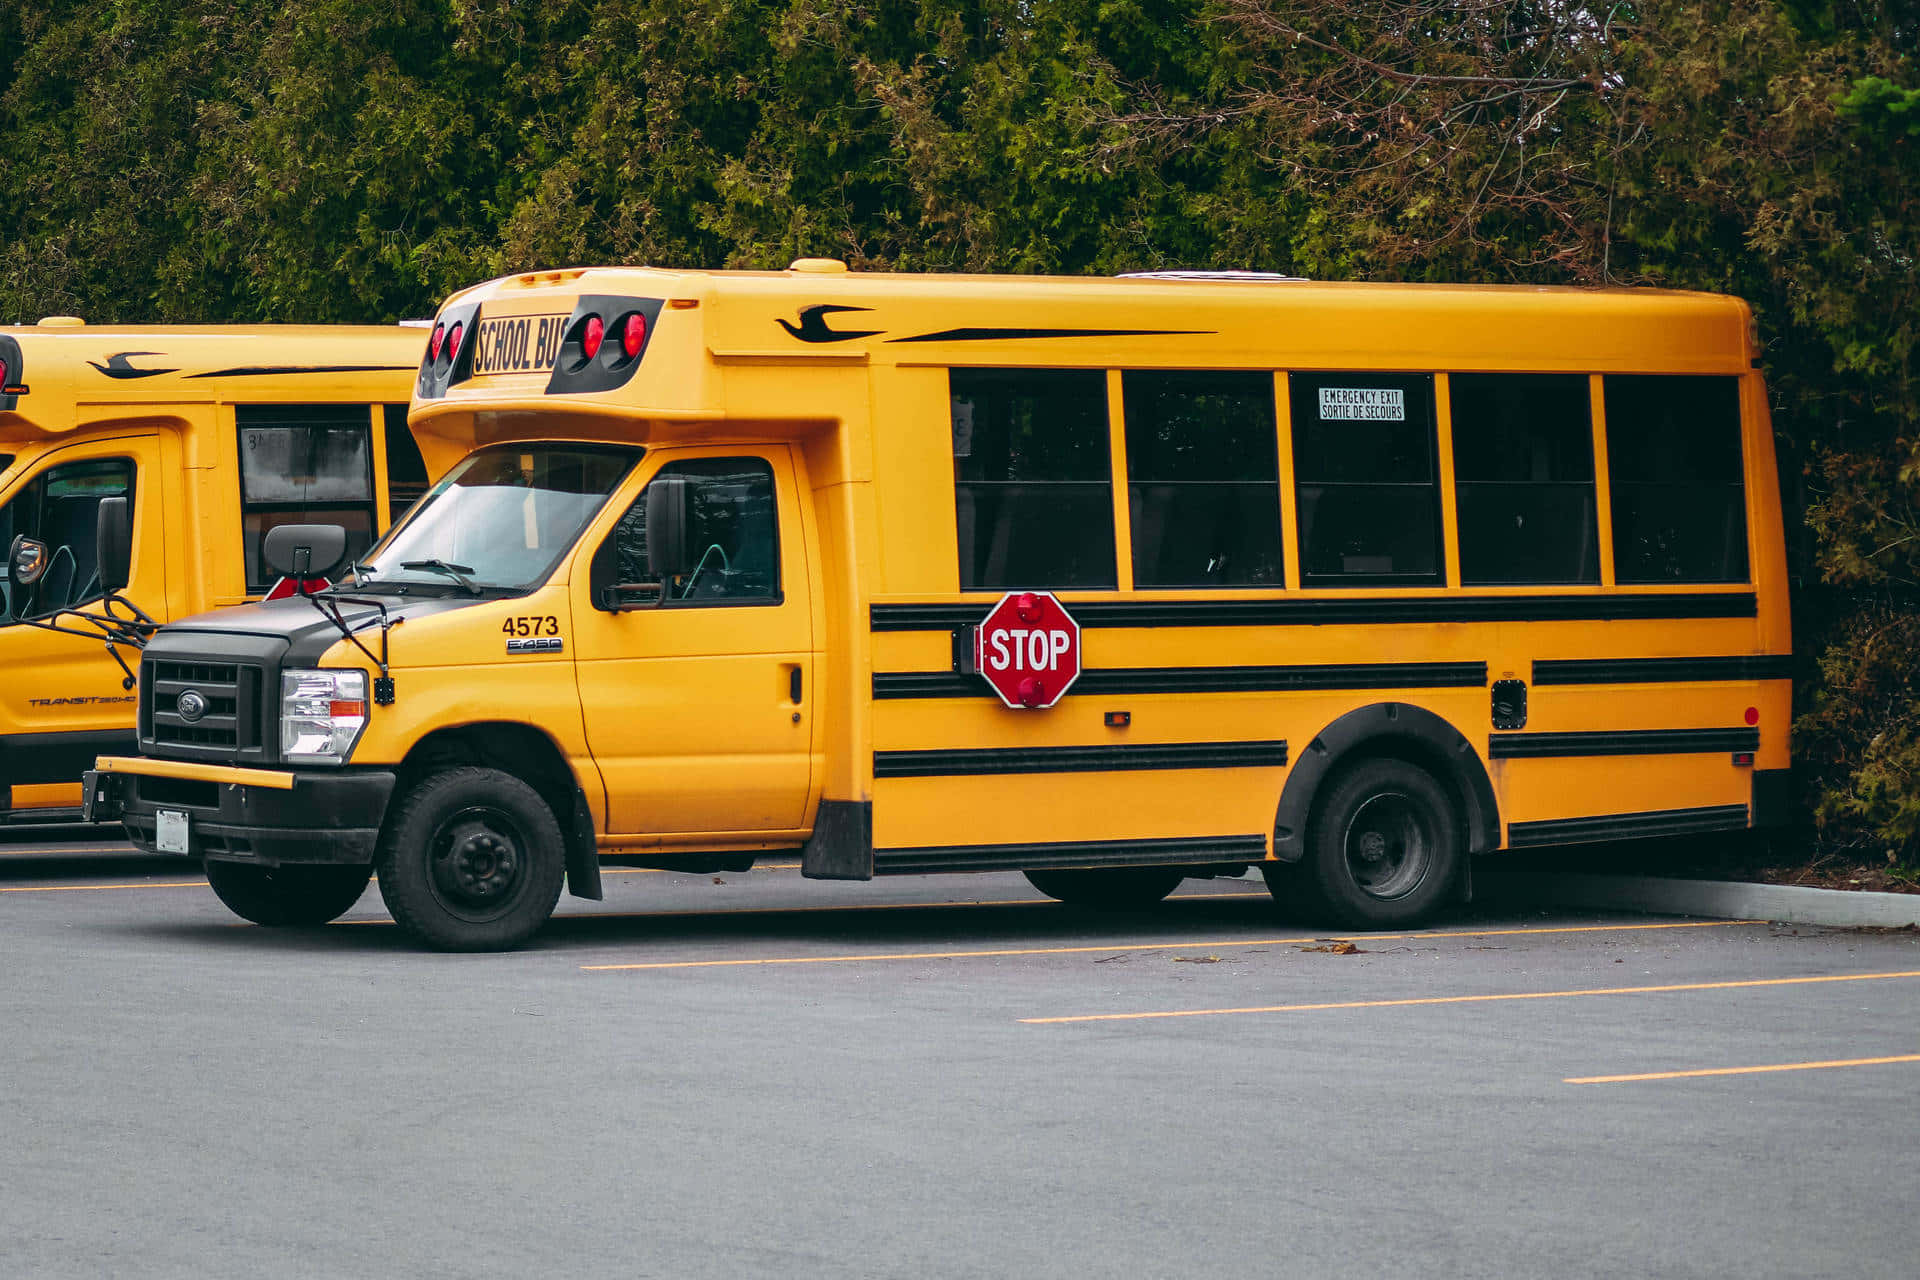 A bright yellow school bus ready to transport students to their destination safely. Wallpaper